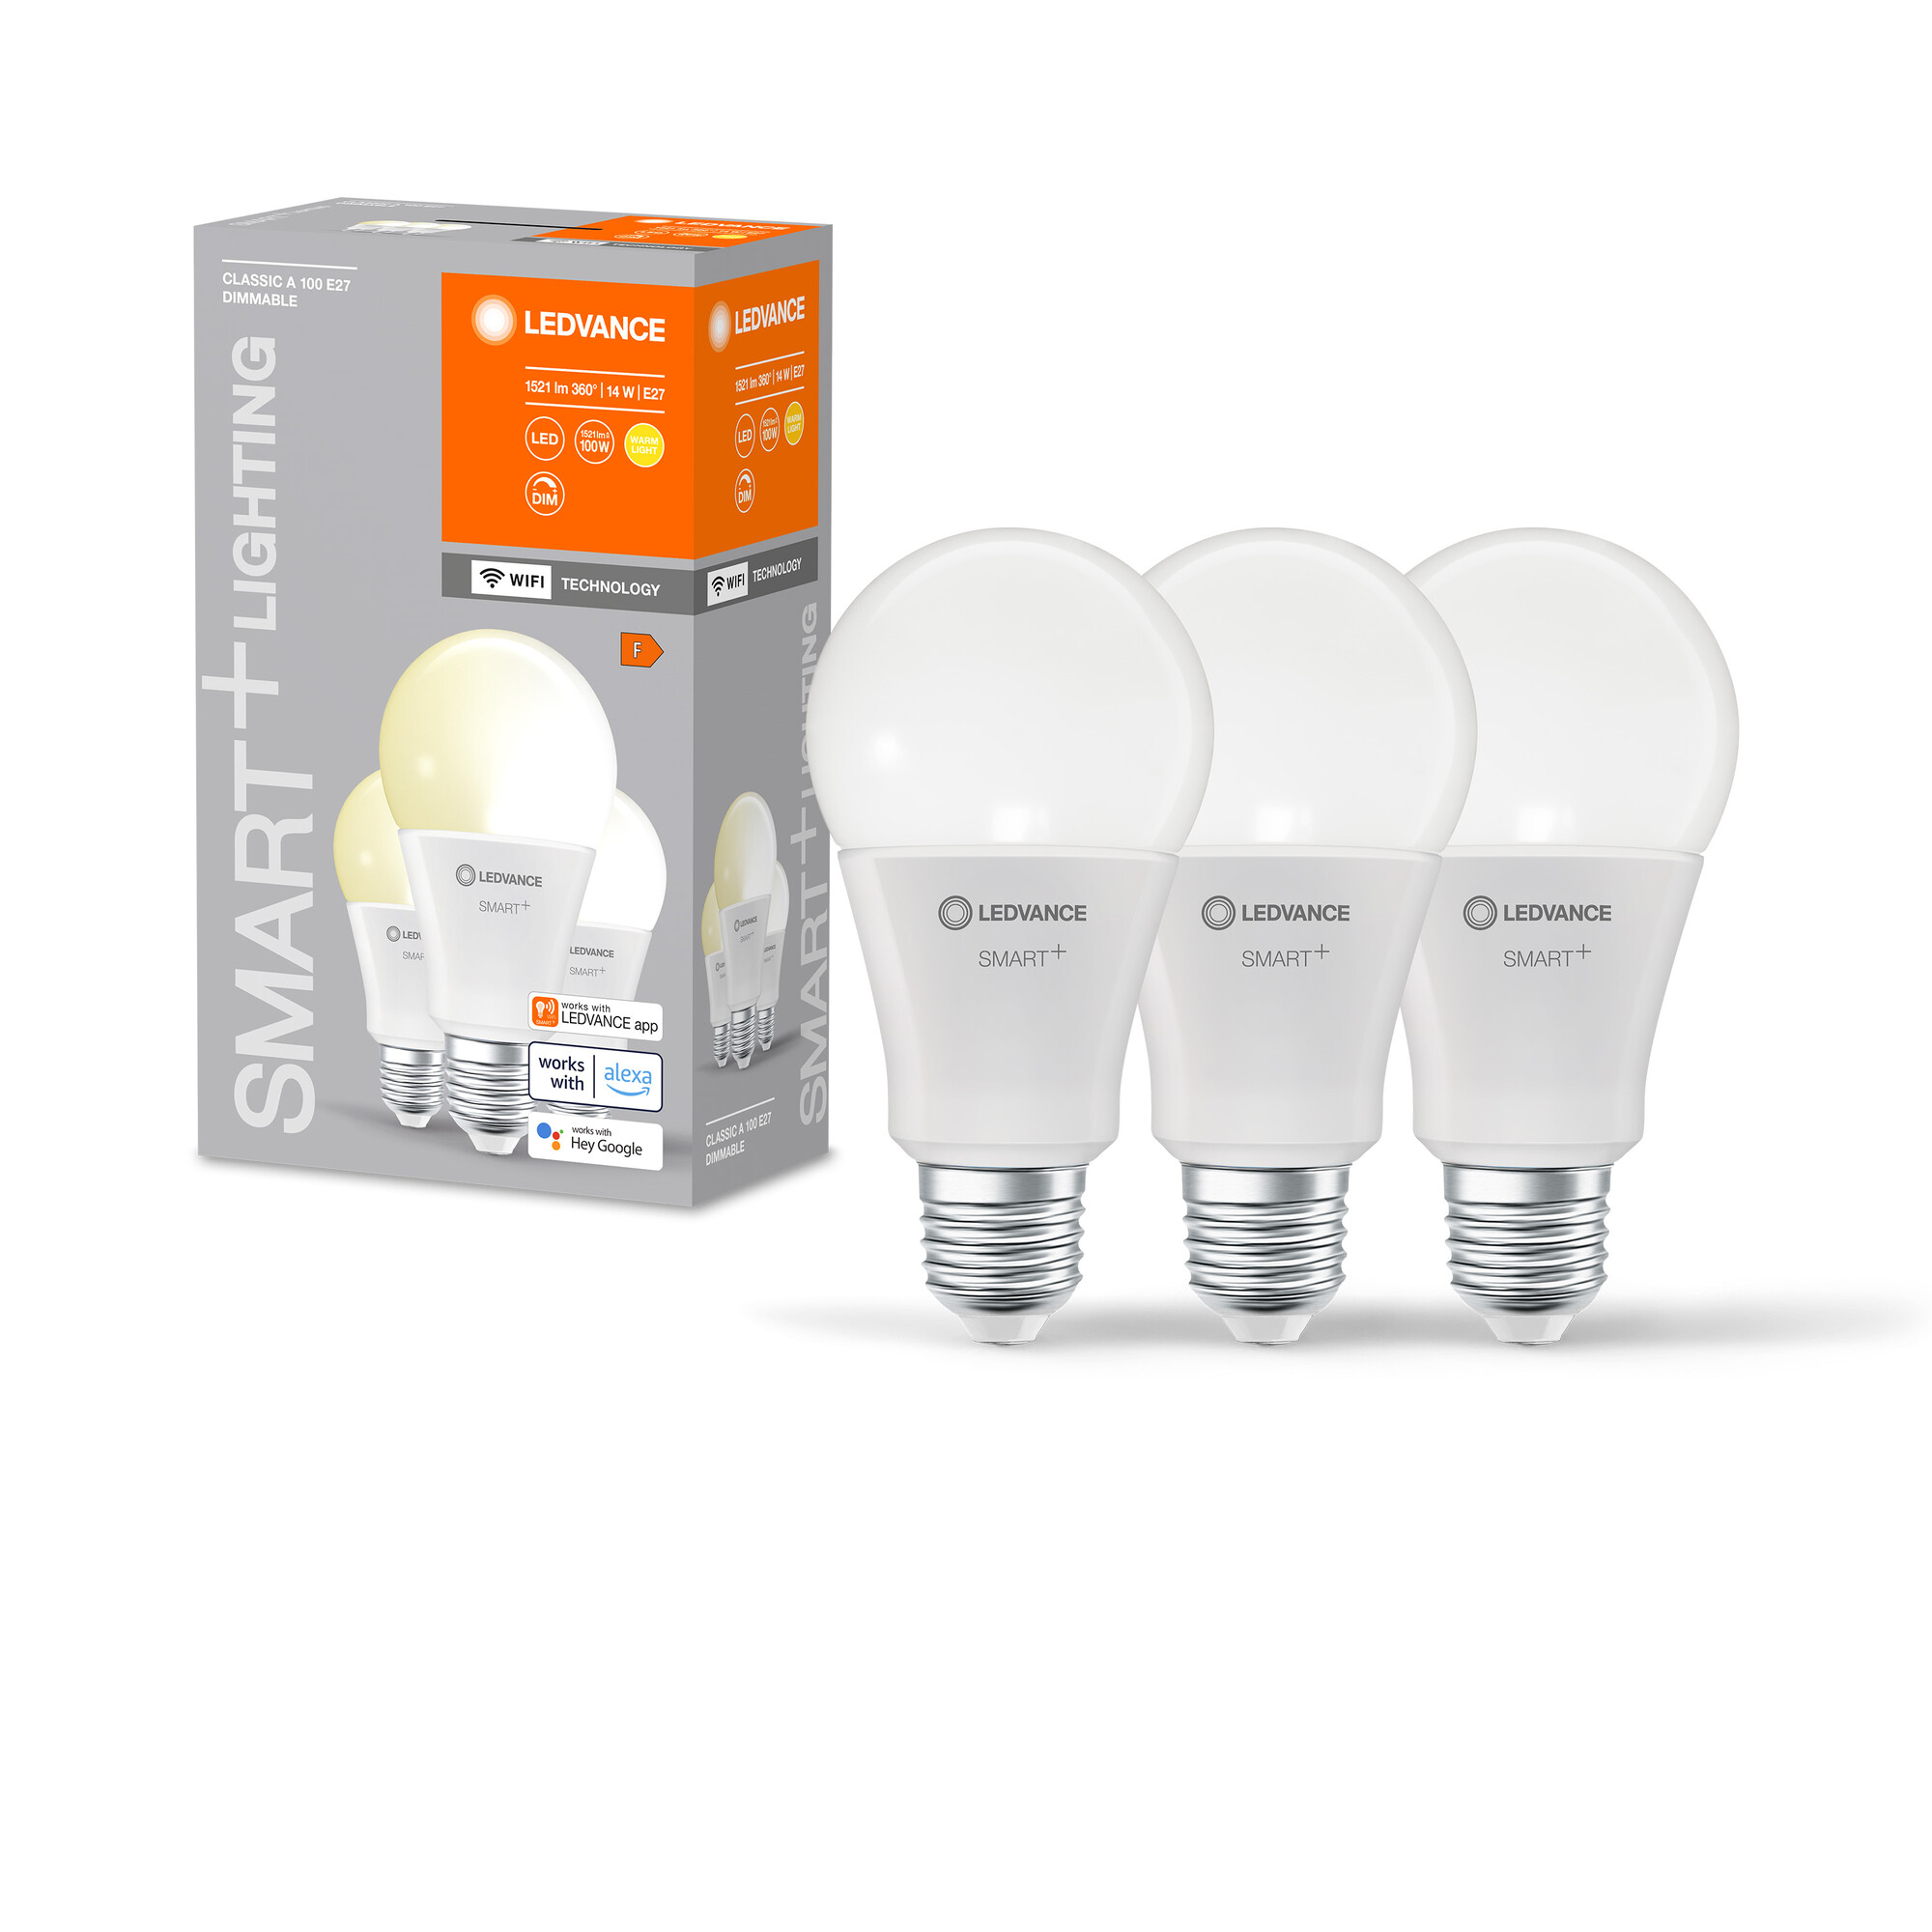 LED-Lampe 'Smart+ WiFi Classic' warmweiß 14 W E27 1521 lm dimmbar 3er-Pack + product picture